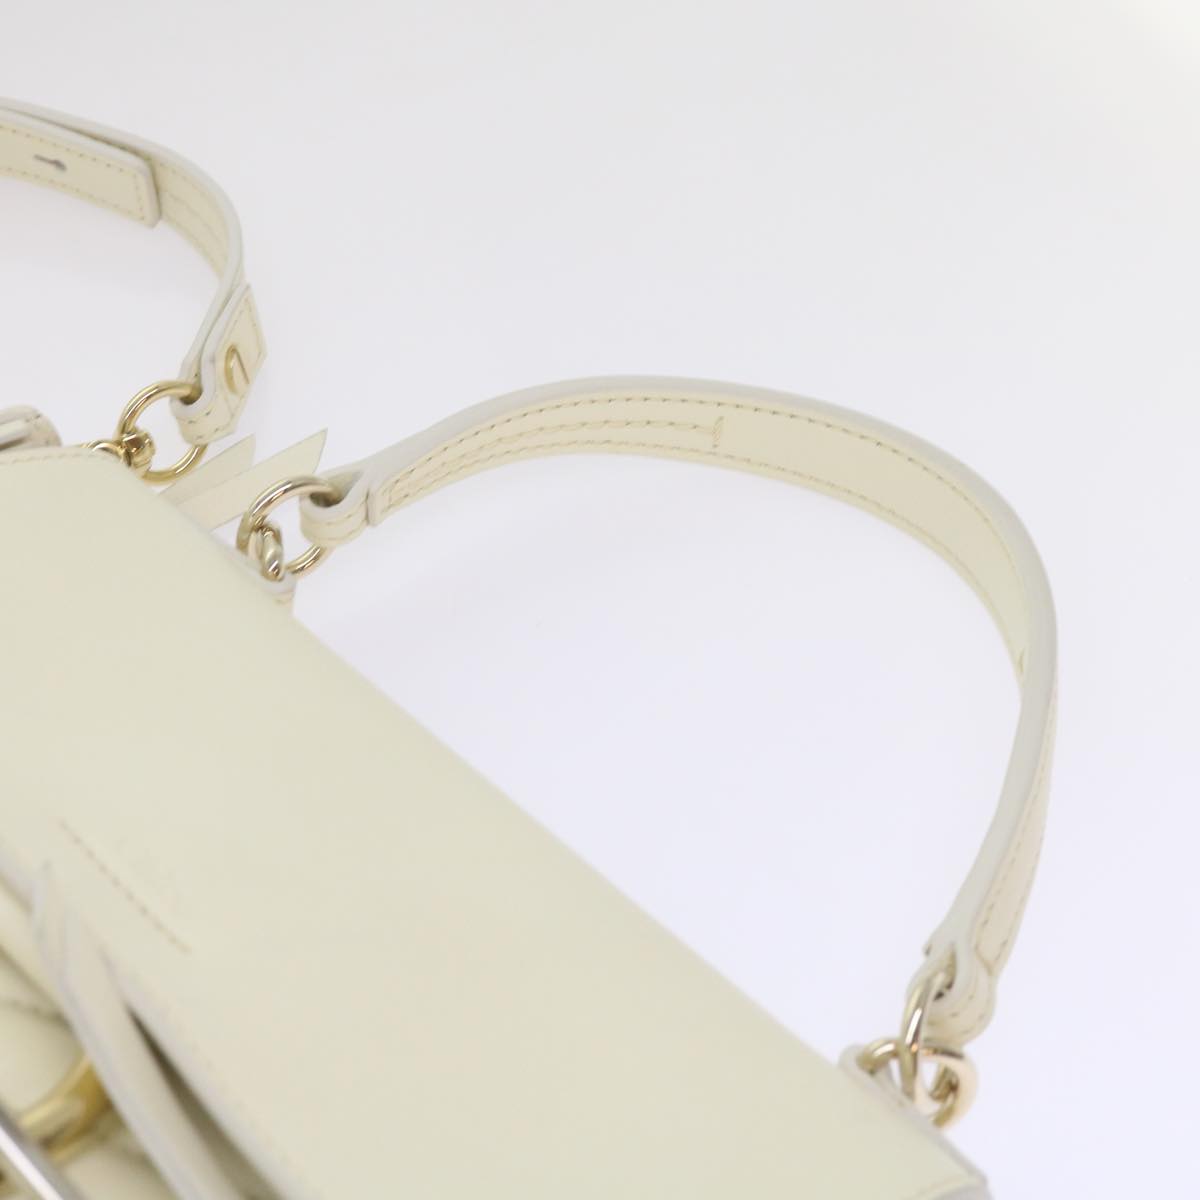 Chloe Faye day Hand Bag Leather White Auth 66645